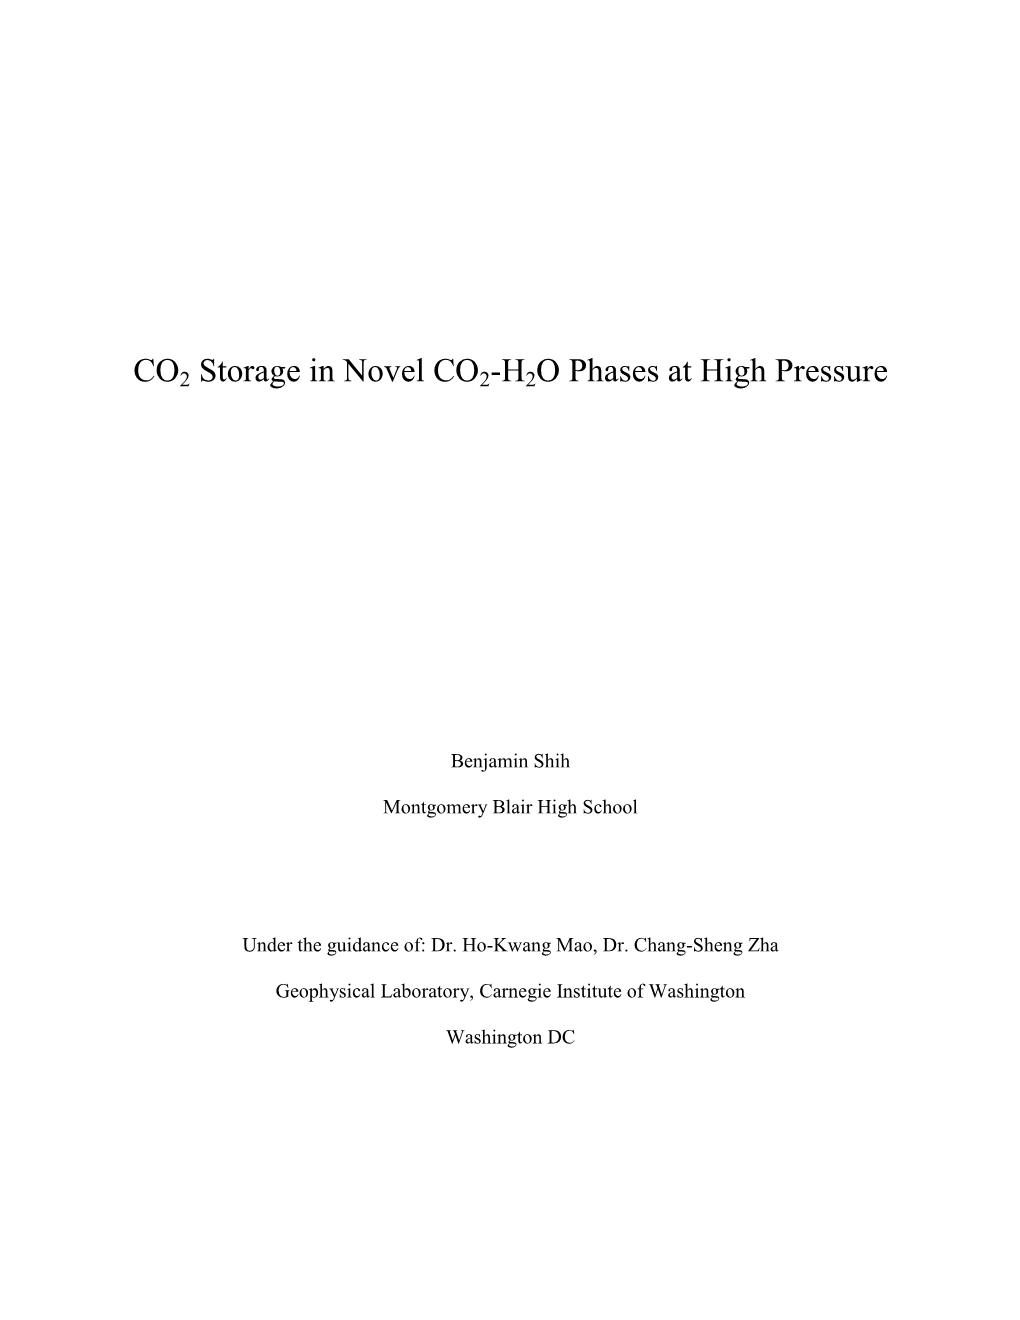 CO2 Storage in Novel CO2-H2O Phases at High Pressure